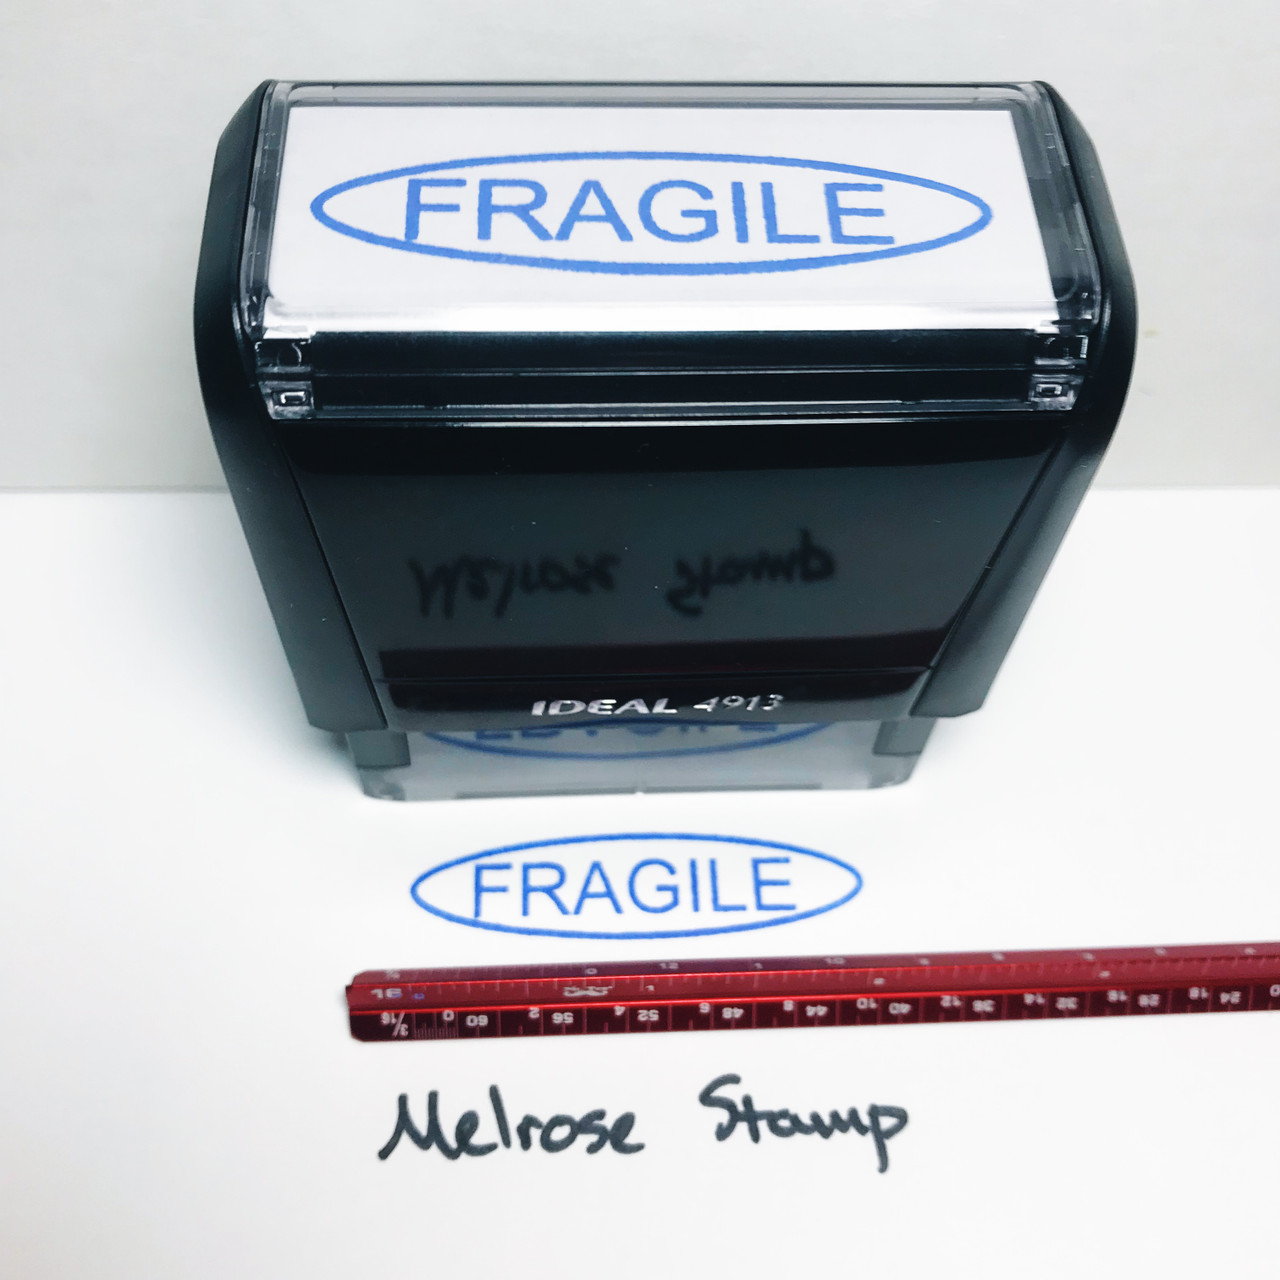 FRAGILE (in oval) Rubber Stamp for mail use self-inking